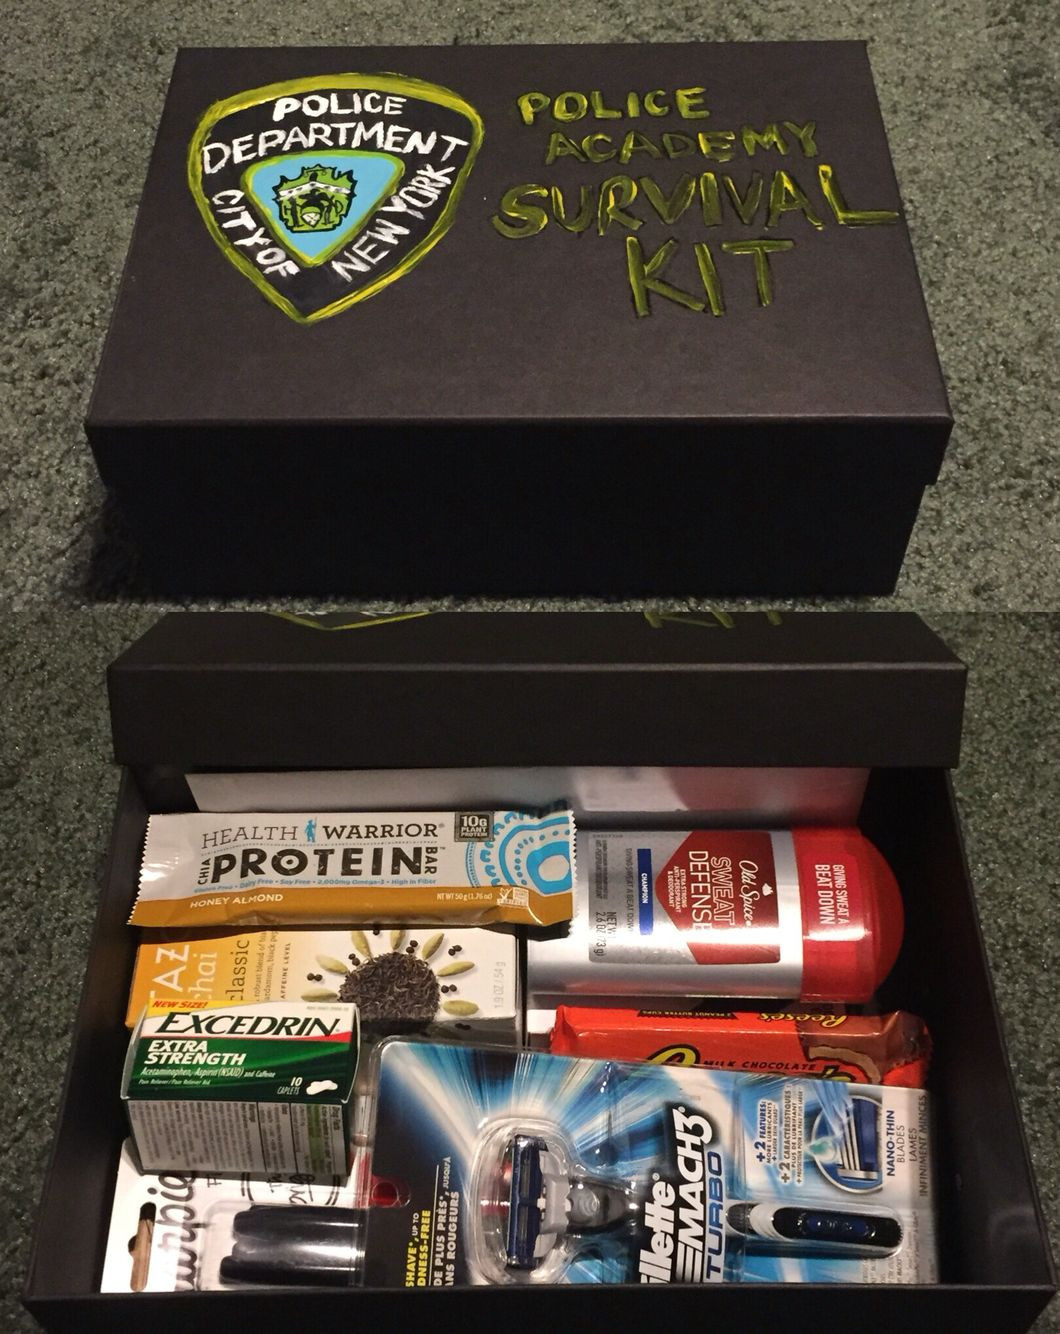 Graduation Gift Ideas For Boyfriend
 DIY police academy survival kit Made this as a t for